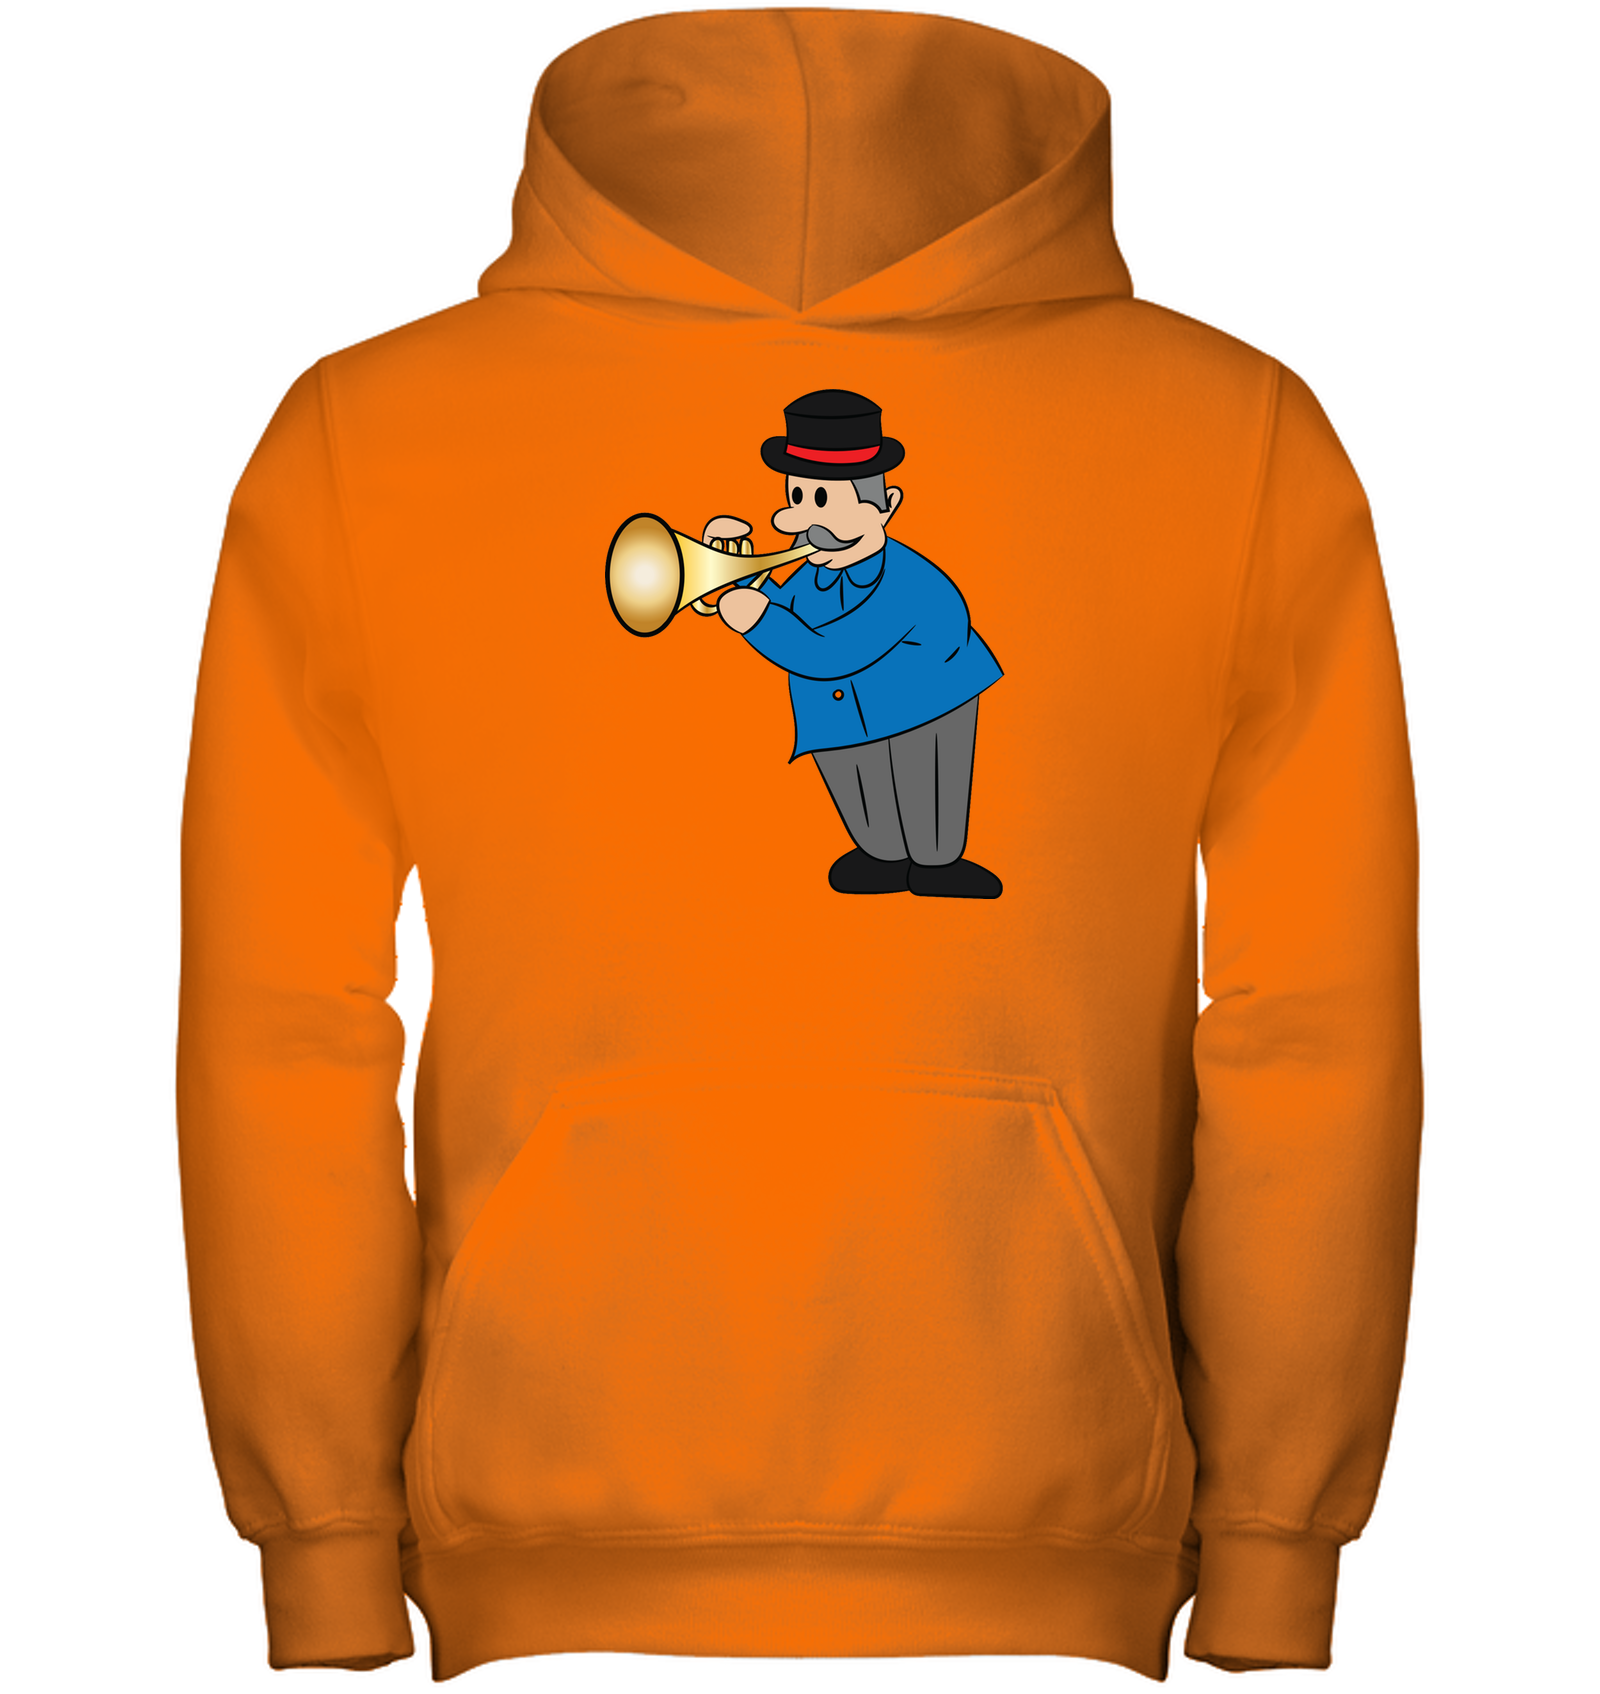 Man with Trumpet - Gildan Youth Heavyweight Pullover Hoodie